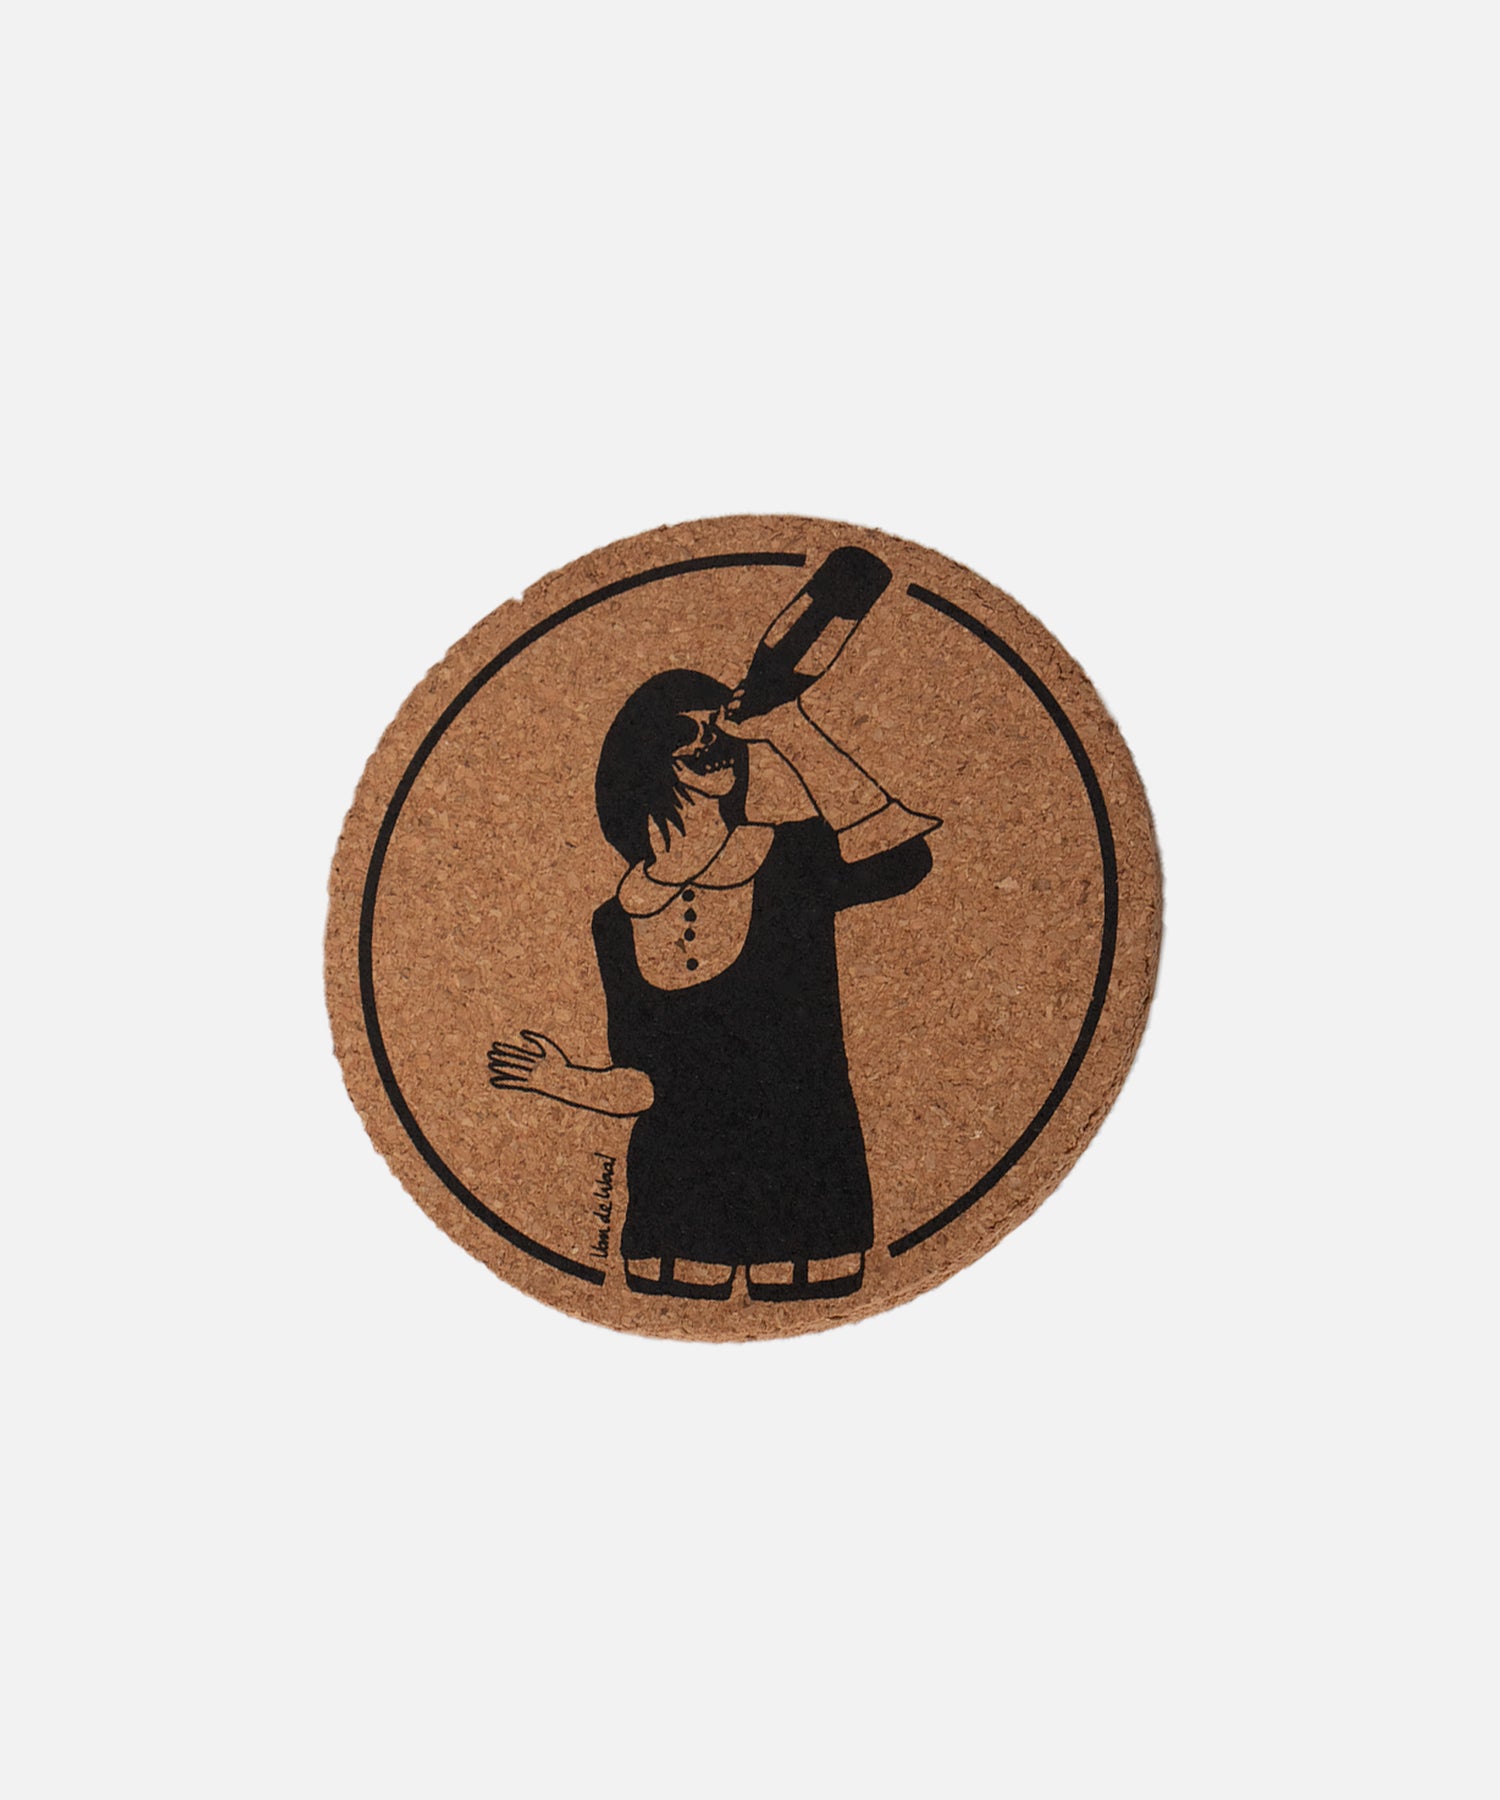 Patta Double Sided Coaster 4-Pack (Natural Cork)